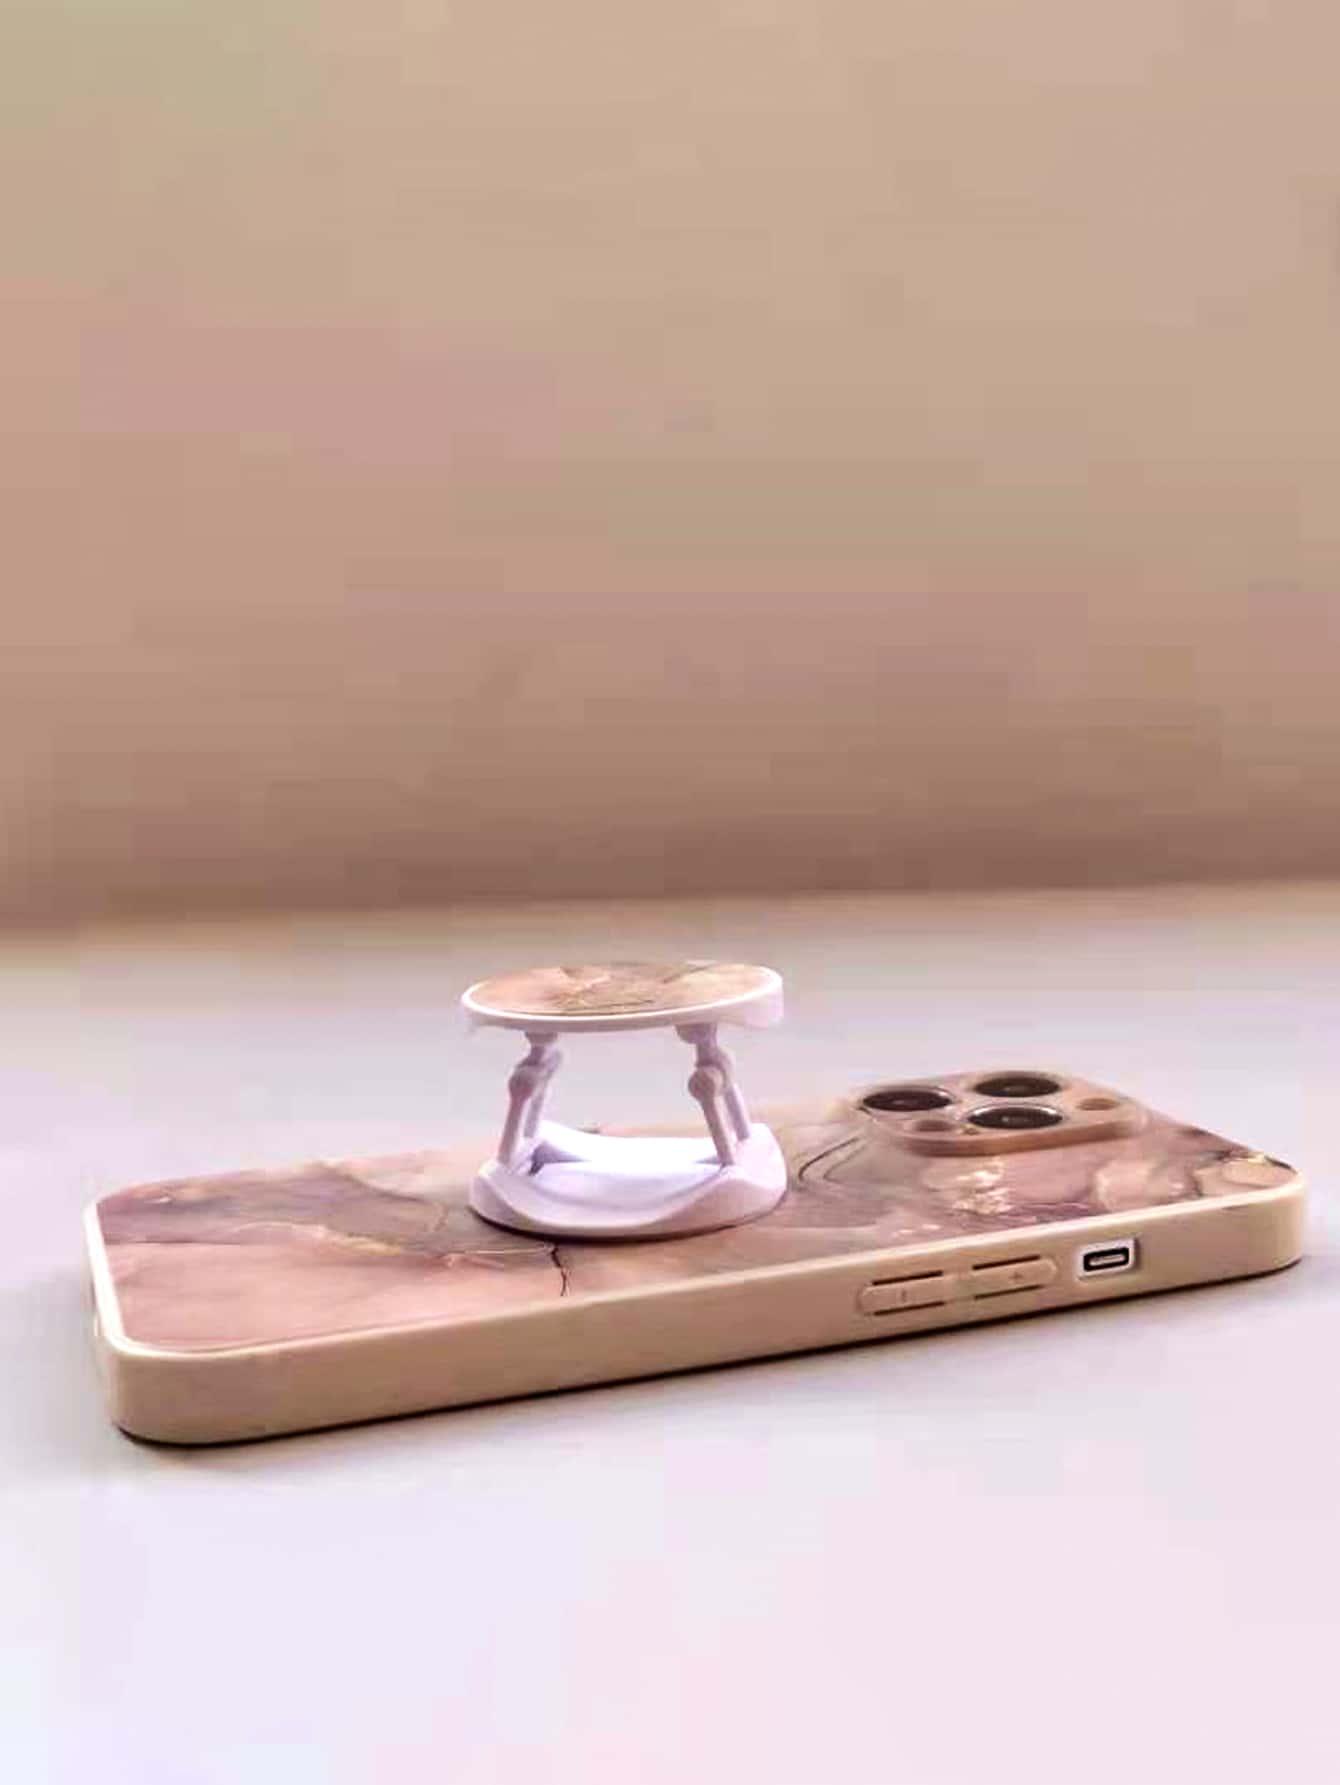 Marble Pattern Phone Case With Stand-Out Phone Grip - Lasercutwraps Shop